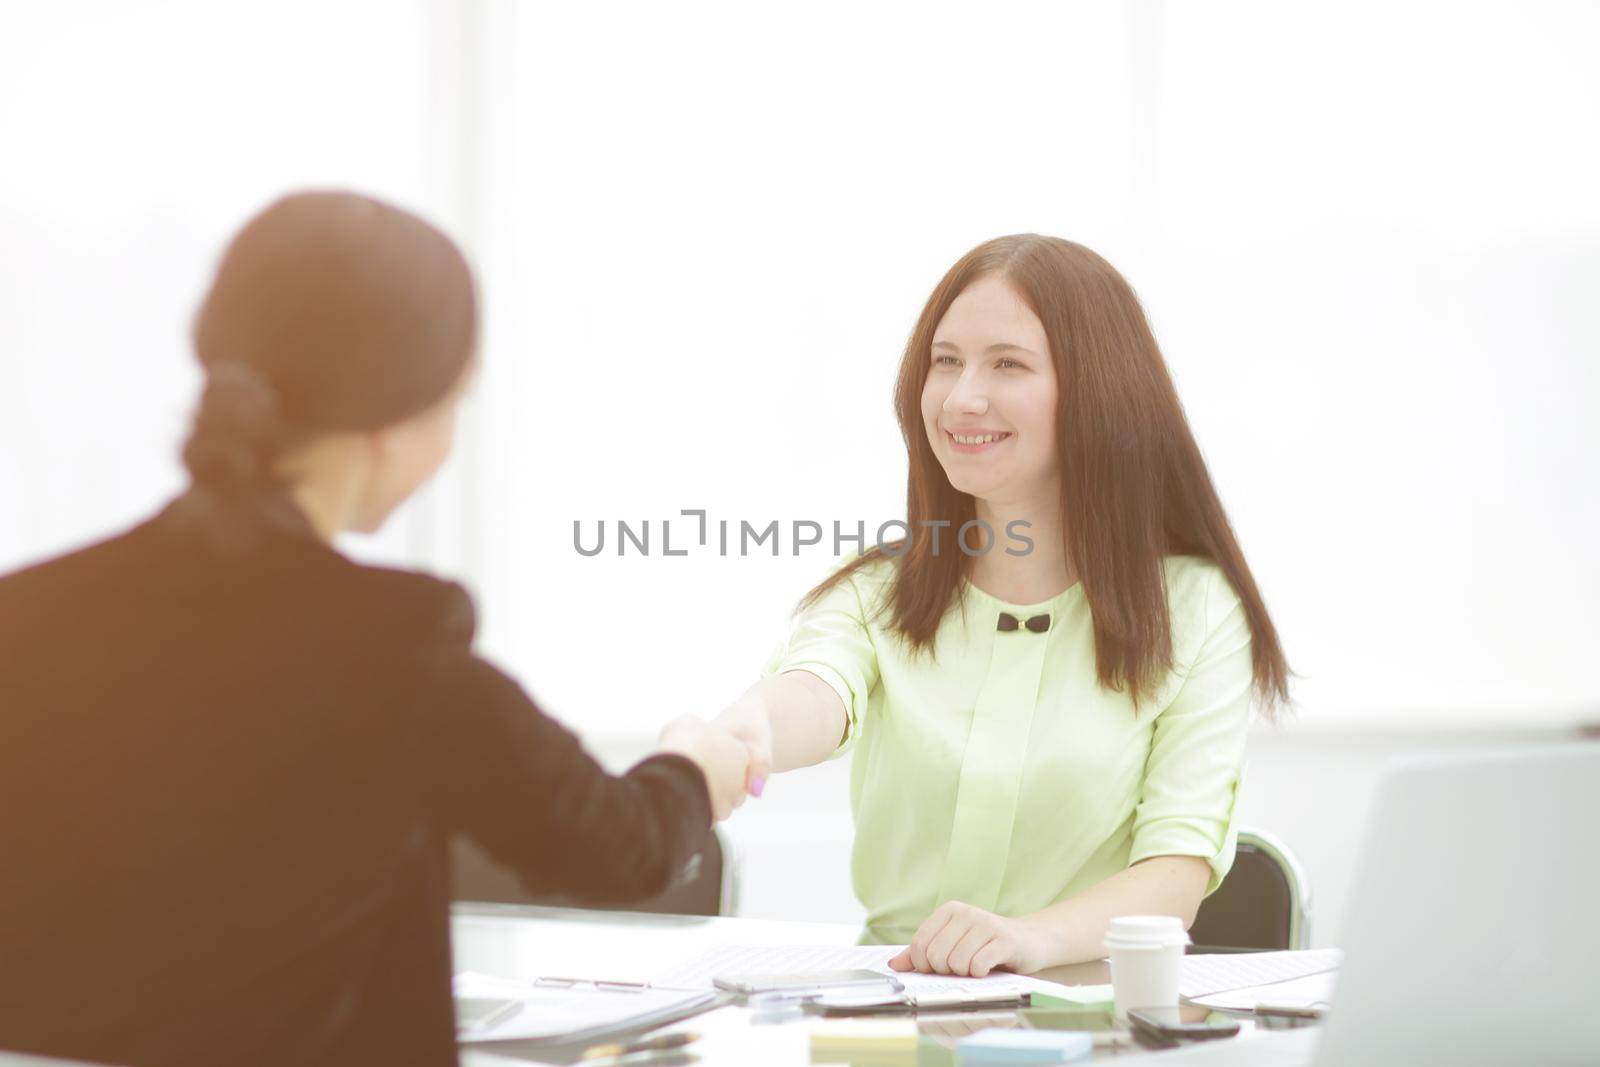 welcome handshake of two business women at the Desk.photo with copy space.